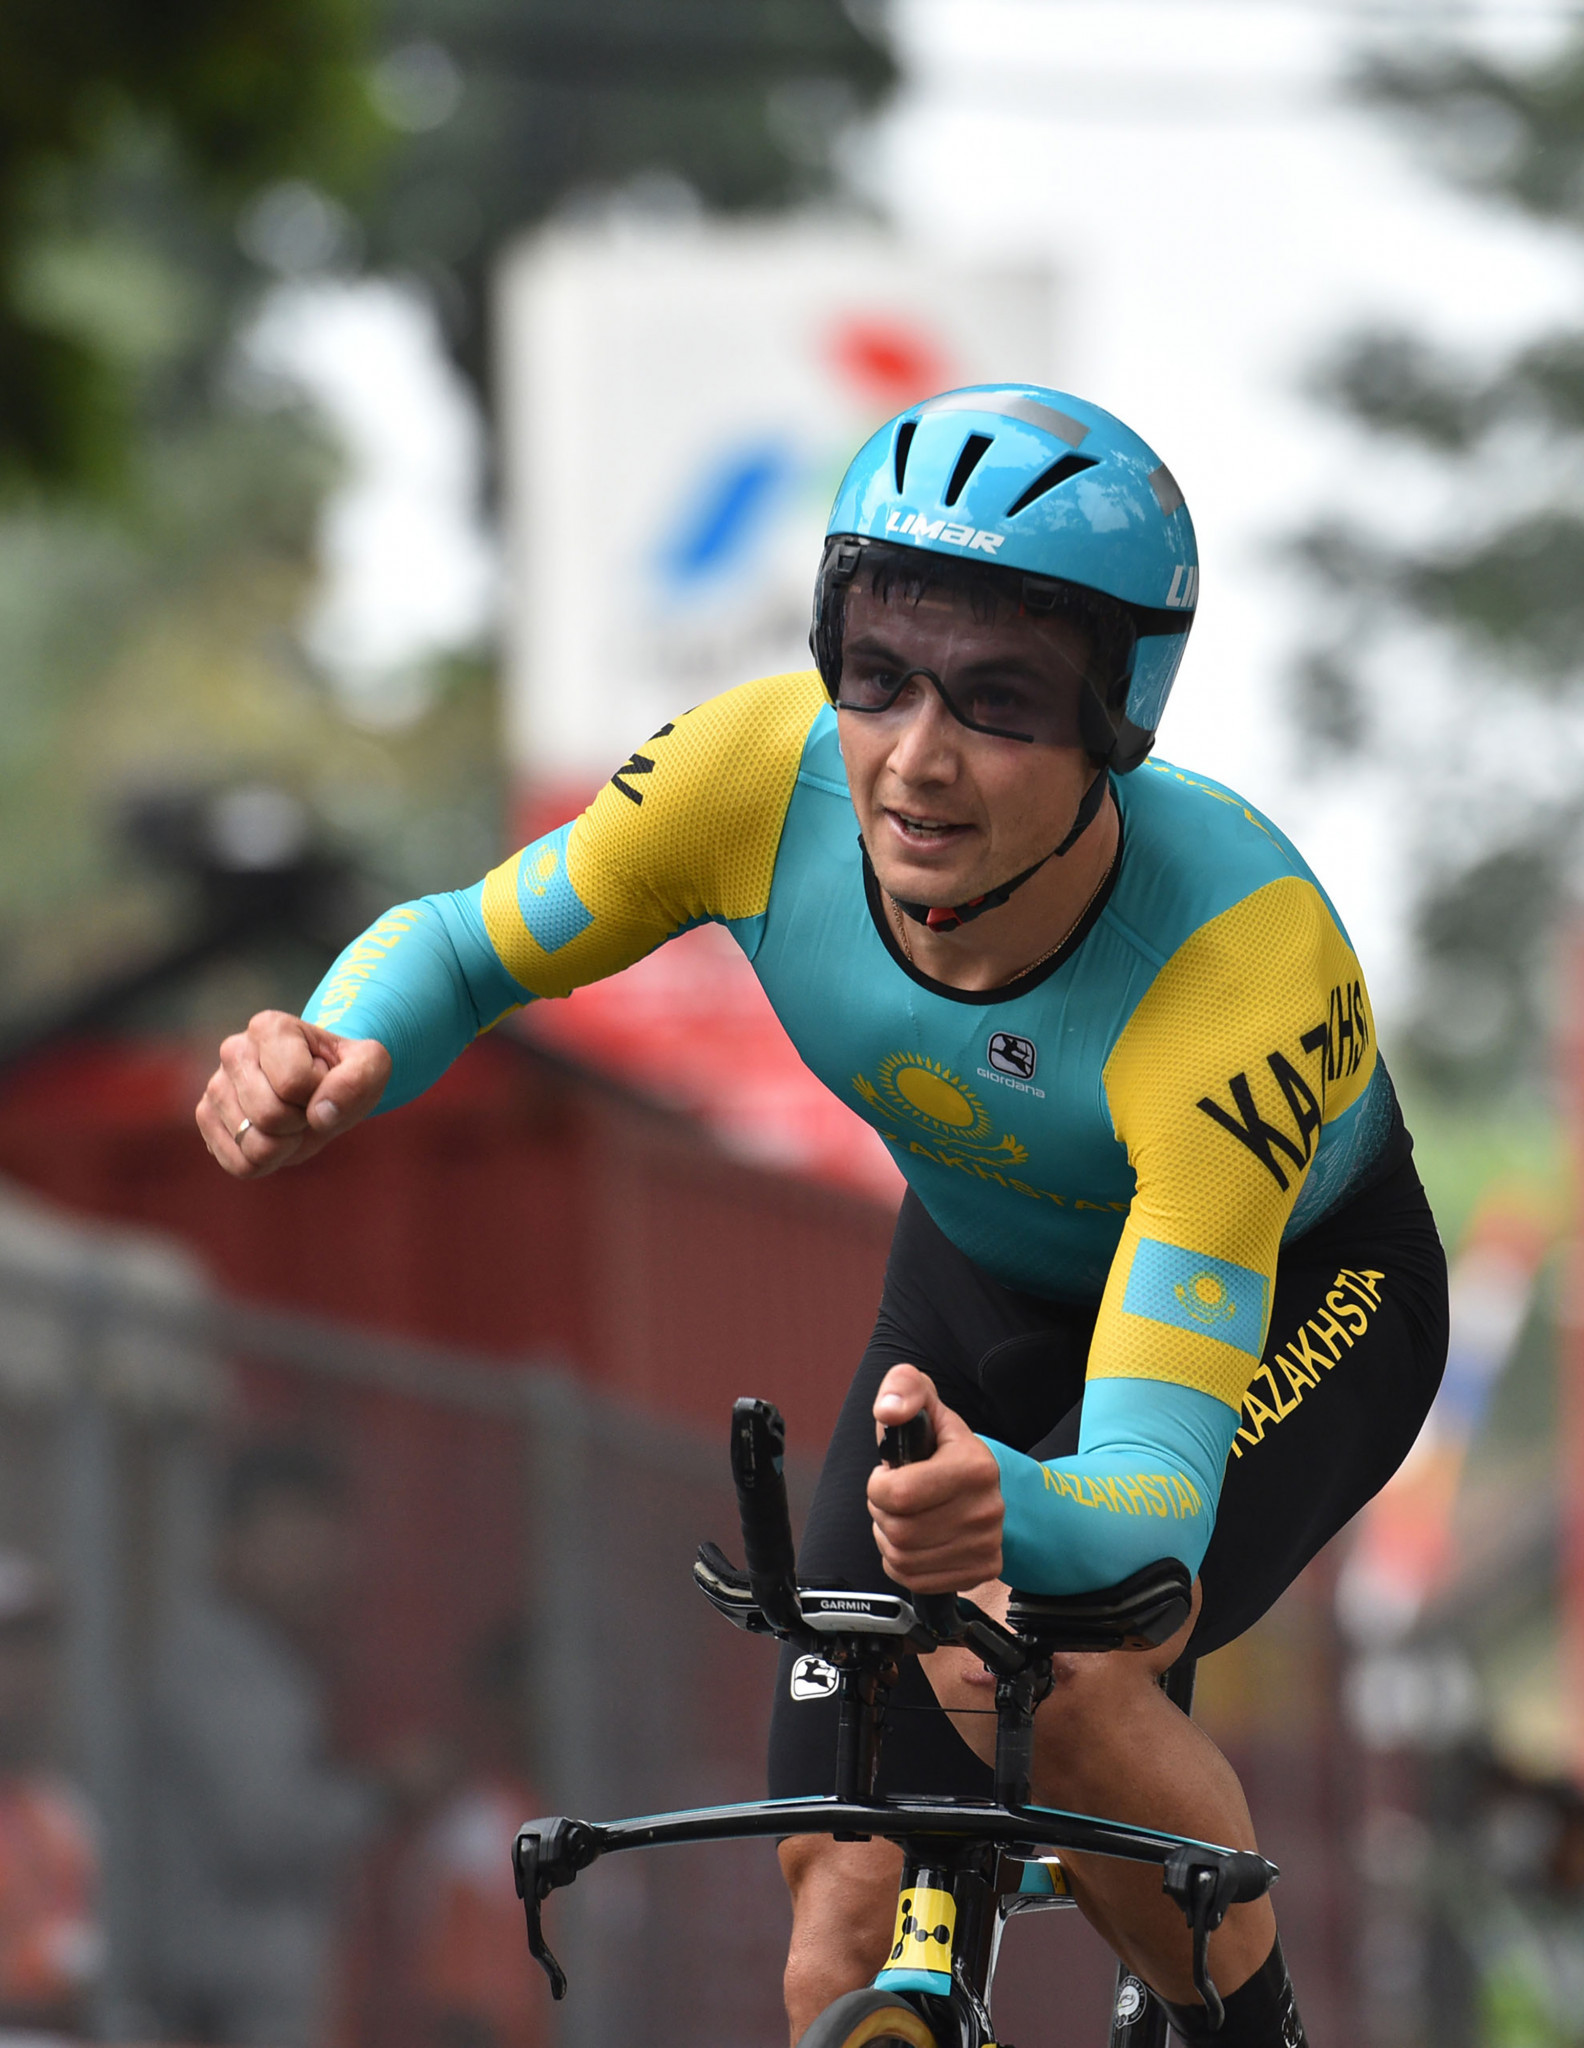 Alexey Lutsenko won the men's time trial to complete an unprecedented double ©Getty Images